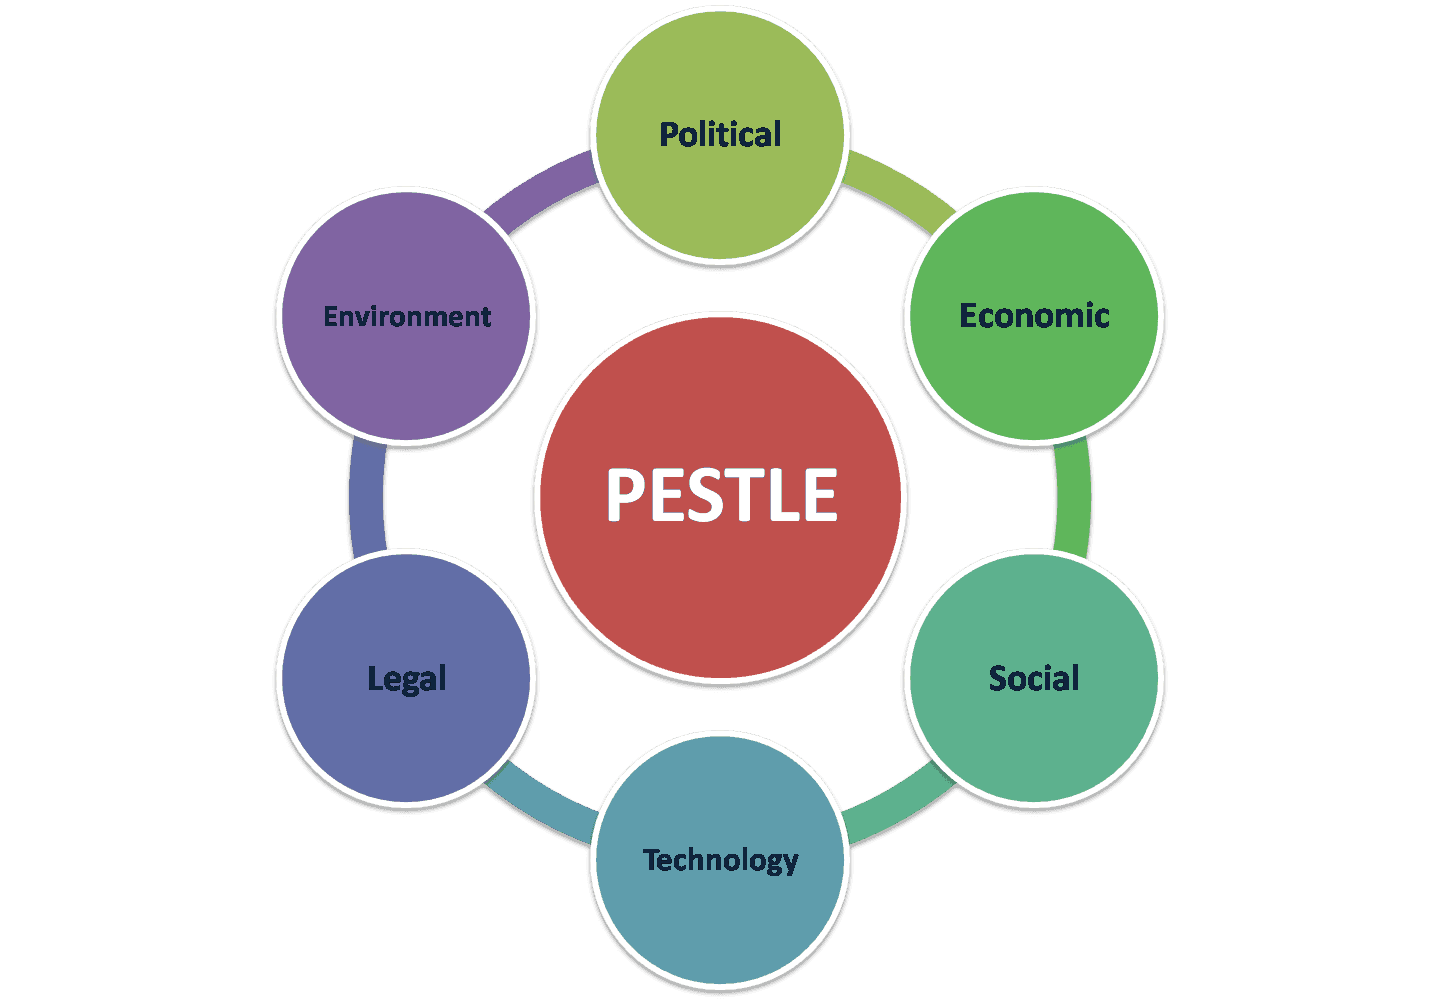 Image of the PESTLE model, where PESTLE is in the middle surrounded by the different points of interest.